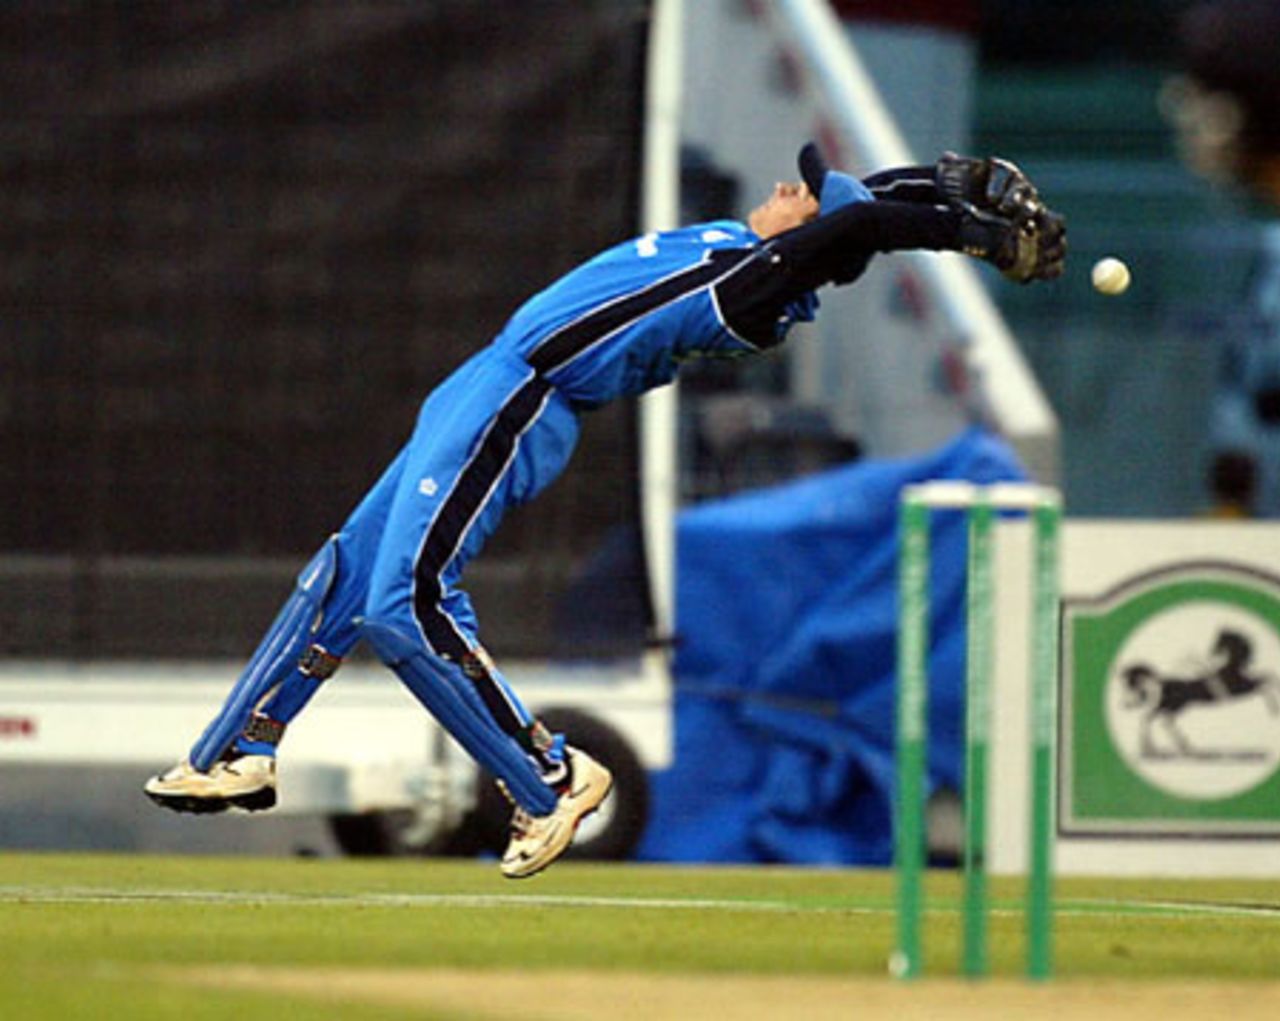 England wicket-keeper James Foster drops a catch from New Zealand batsman Nathan Astle off the bowling of Andy Caddick. Astle was on 11 and went on to score 67 not out. 1st ODI: New Zealand v England at Jade Stadium, Christchurch, 13 February 2002.